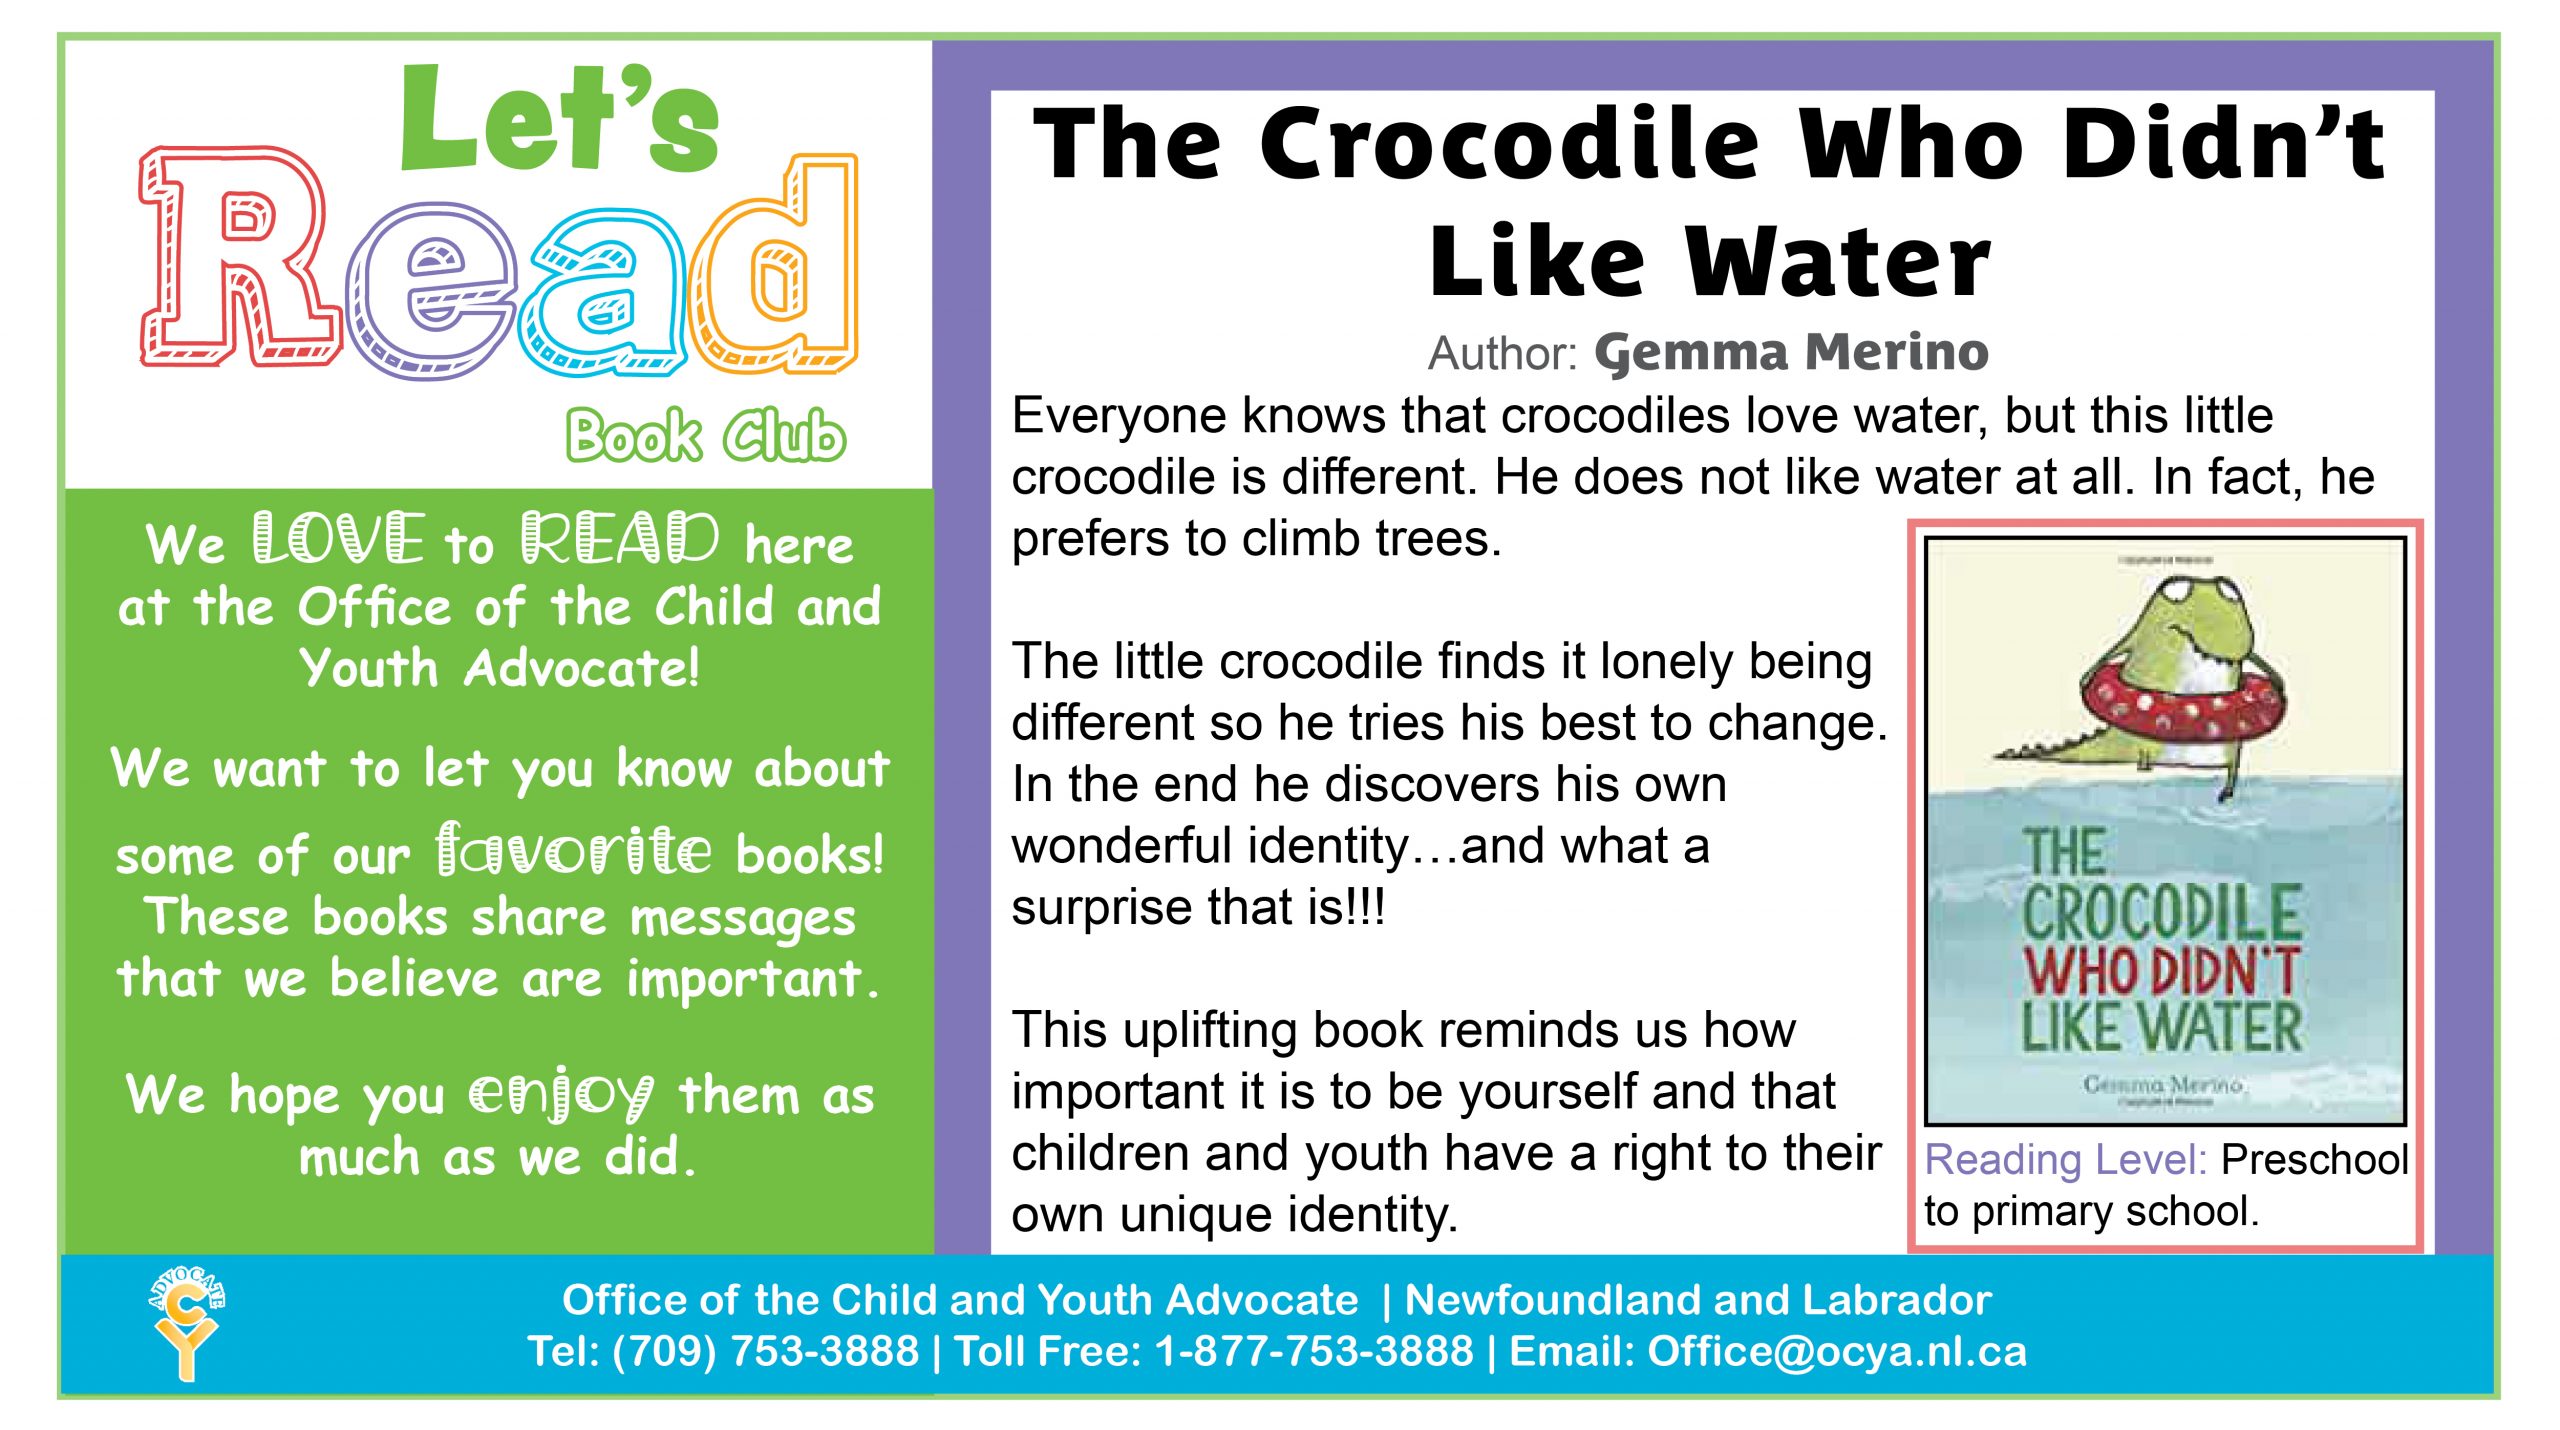 The Crocodile Who Didn't Like Water, by Gemma Merino.  Everyone knows that crocodiles love water, but this little crocodile is different. He does not like water at all. In fact, he prefers to climb trees.  The little crocodile finds it lonely being different so he tries his best to change. In the end he discovers his own wonderful identity...and what a surprise that is!!!  This uplifting book reminds us how important it is to be yourself and that children and youth have a right to their own unique identity.